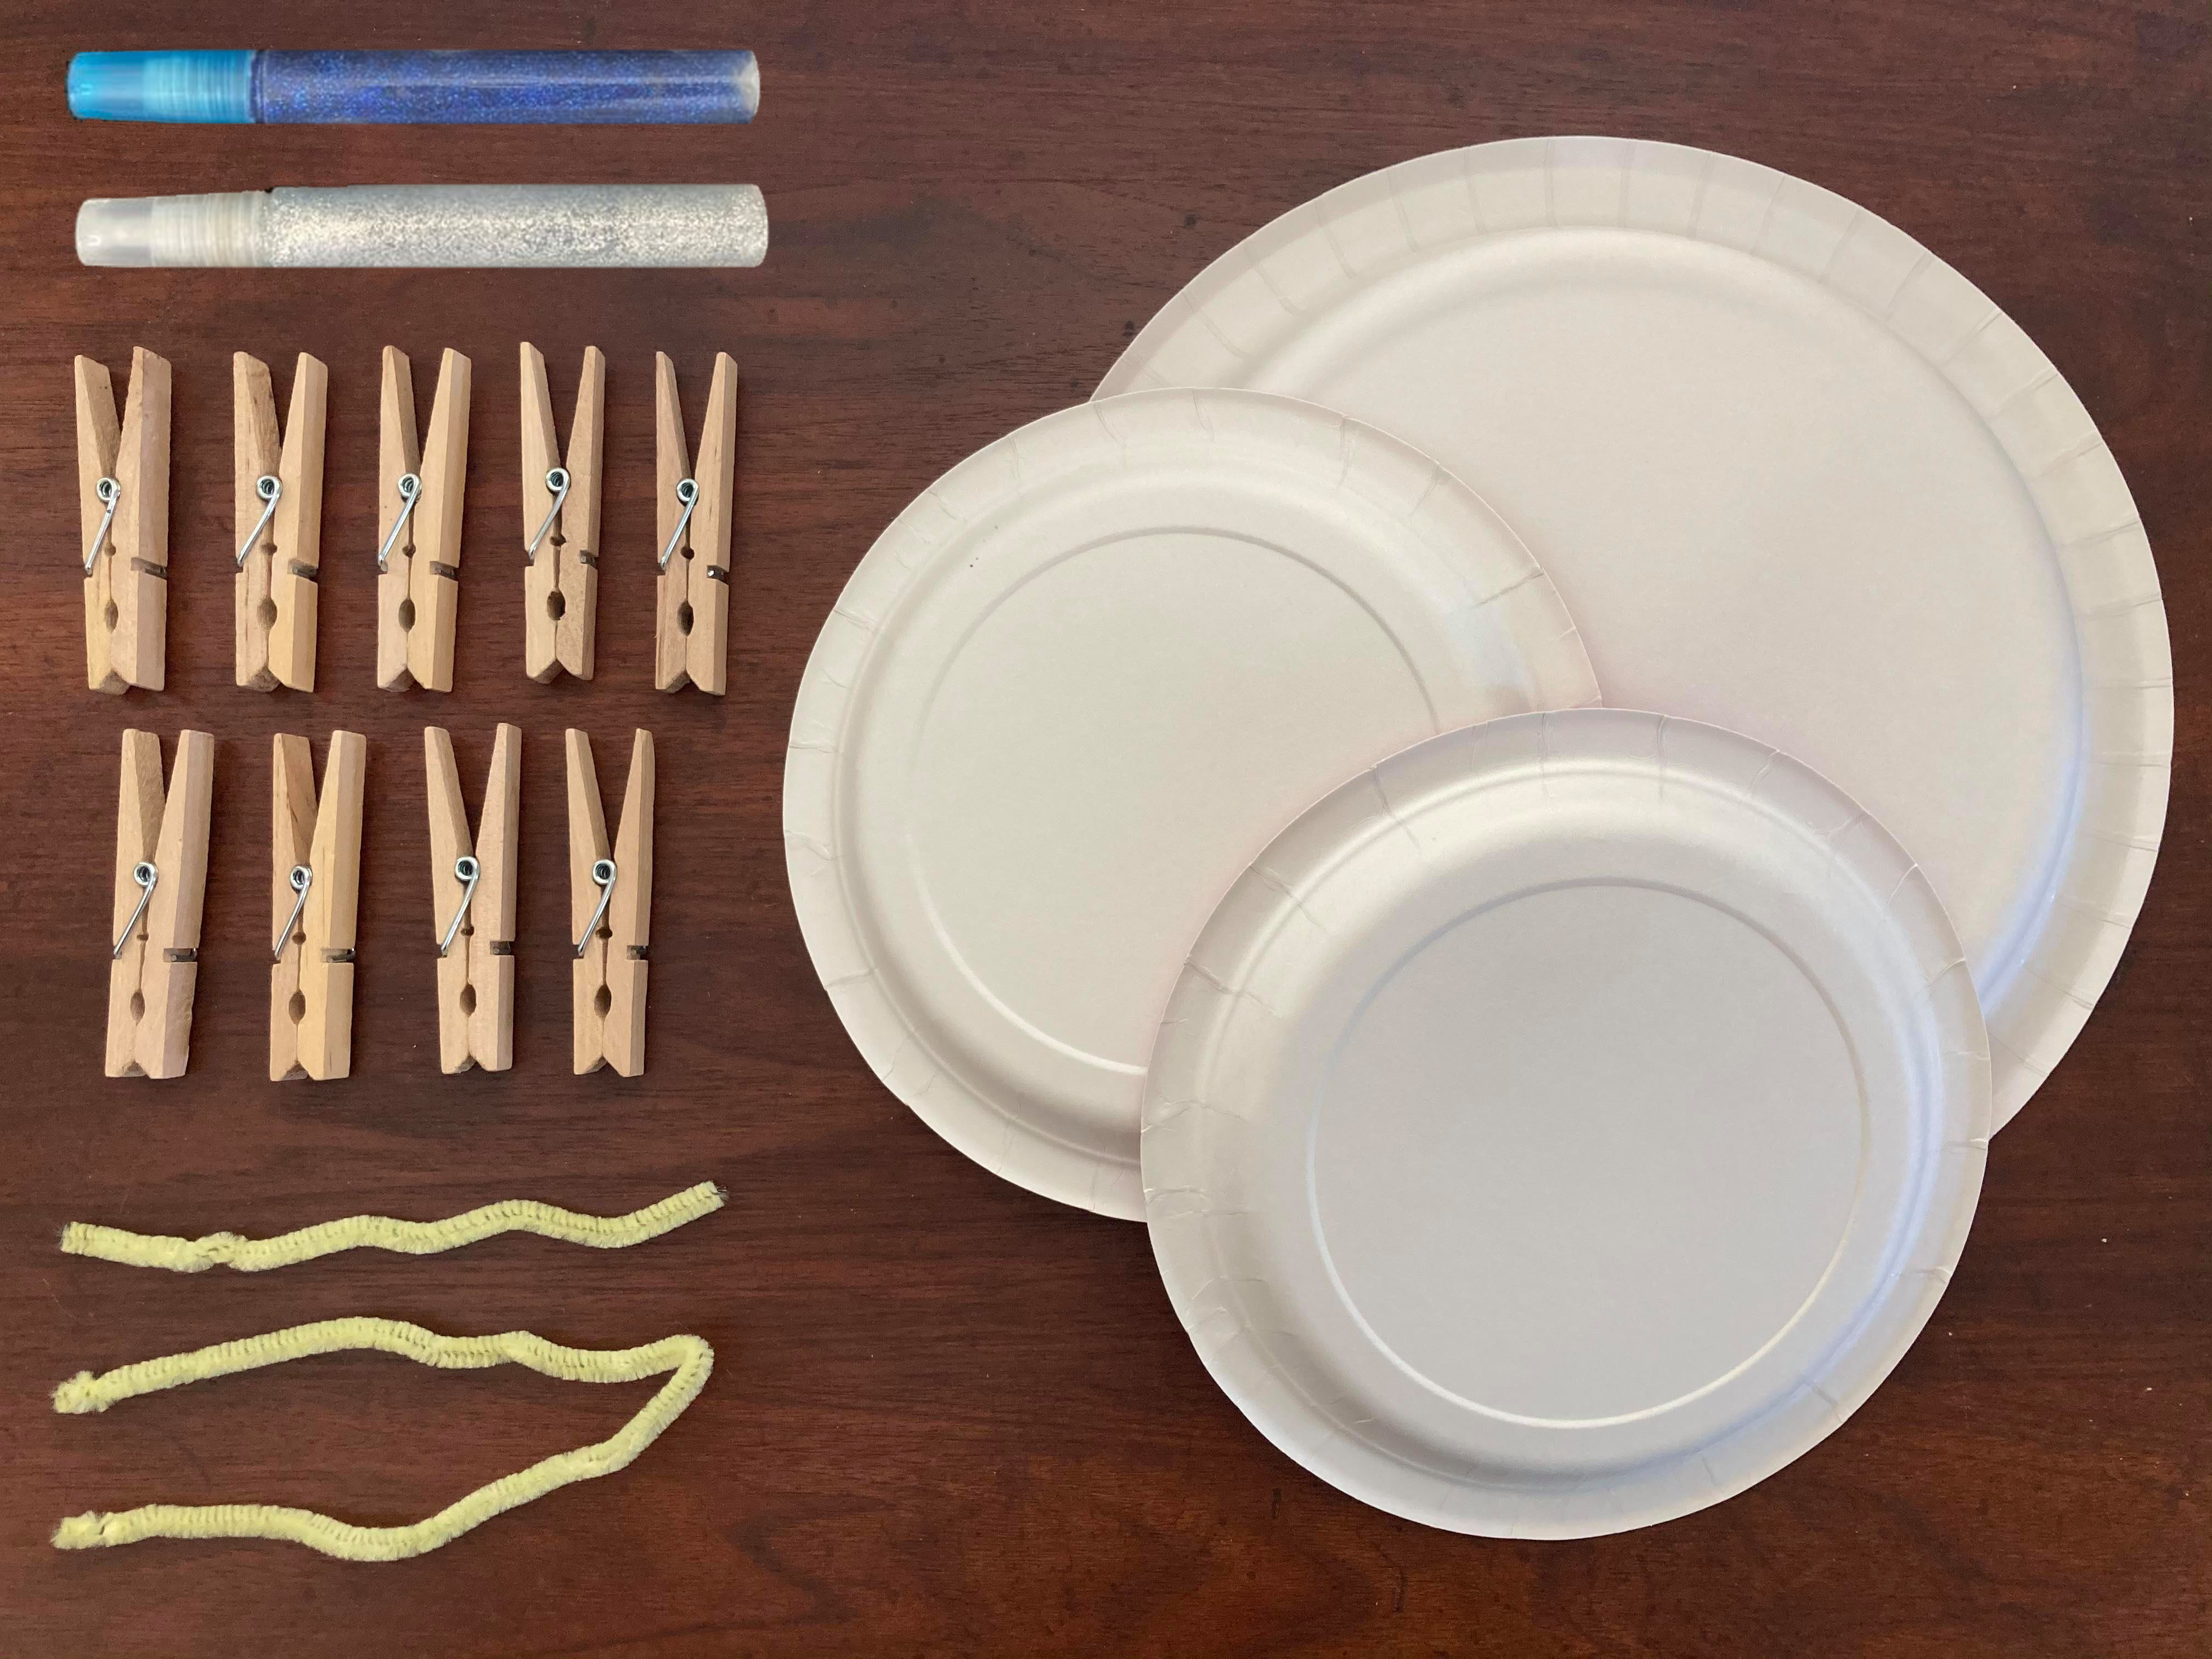 Supplies for the DIY menorah craft from Little Passports